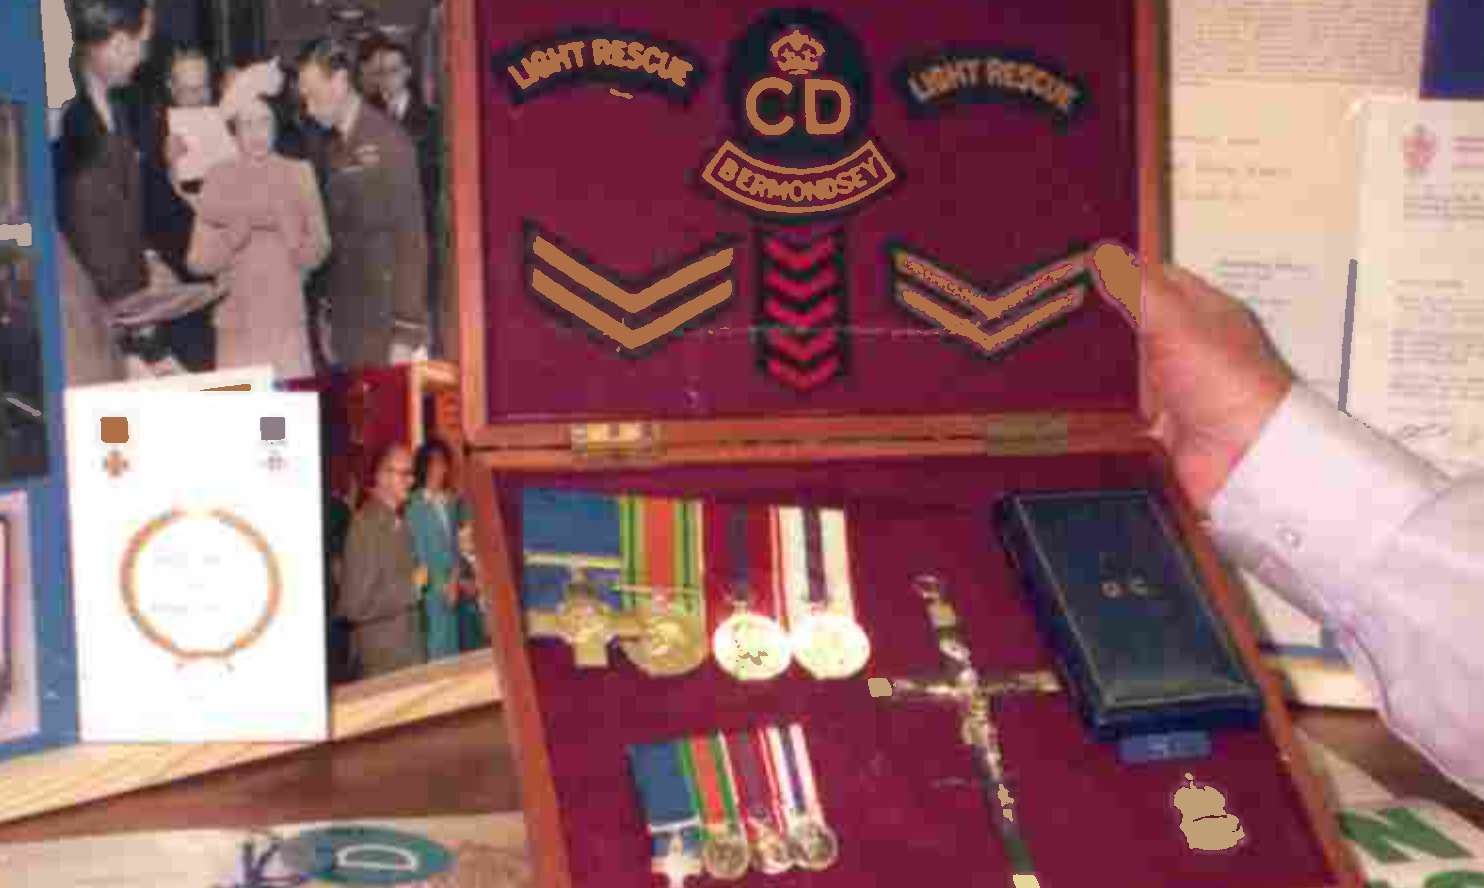 The case of medals stolen in the burglary that has left a family heartbroken